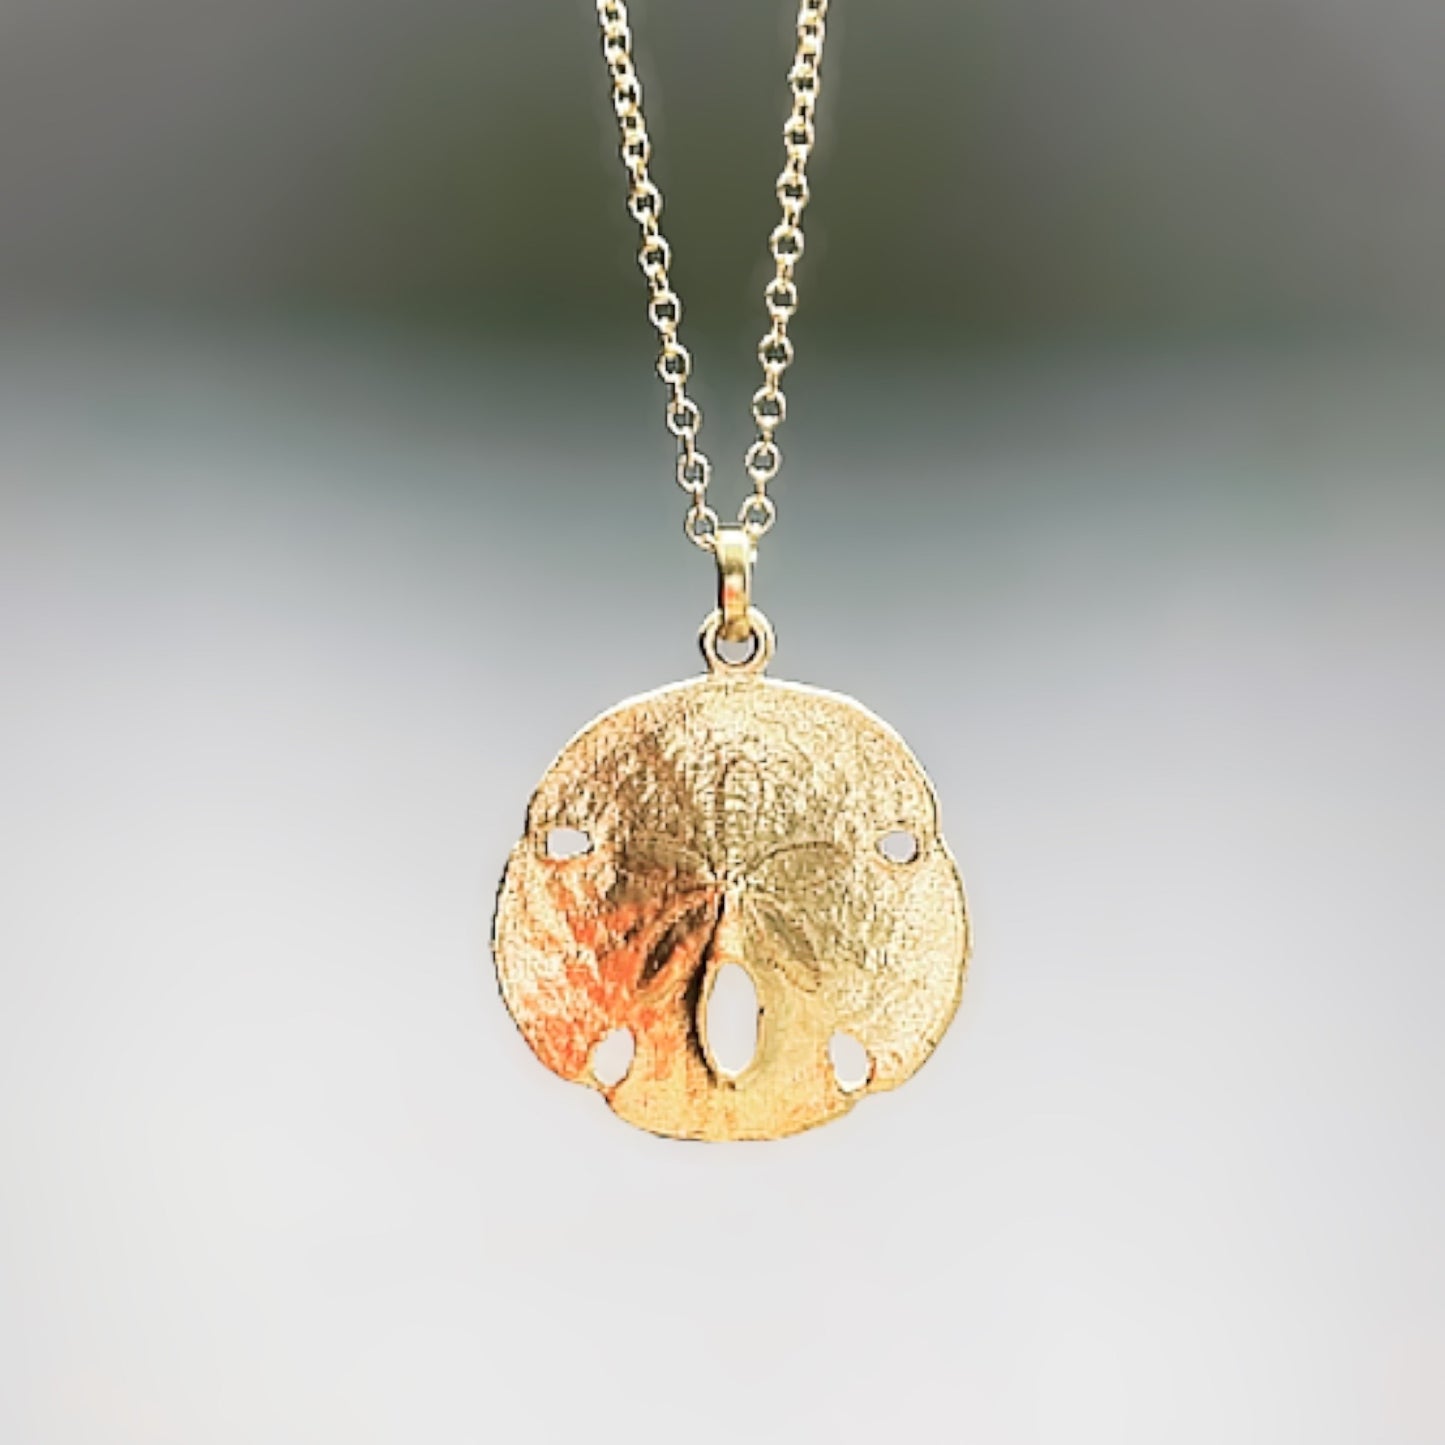 Small Sand Dollar Necklace